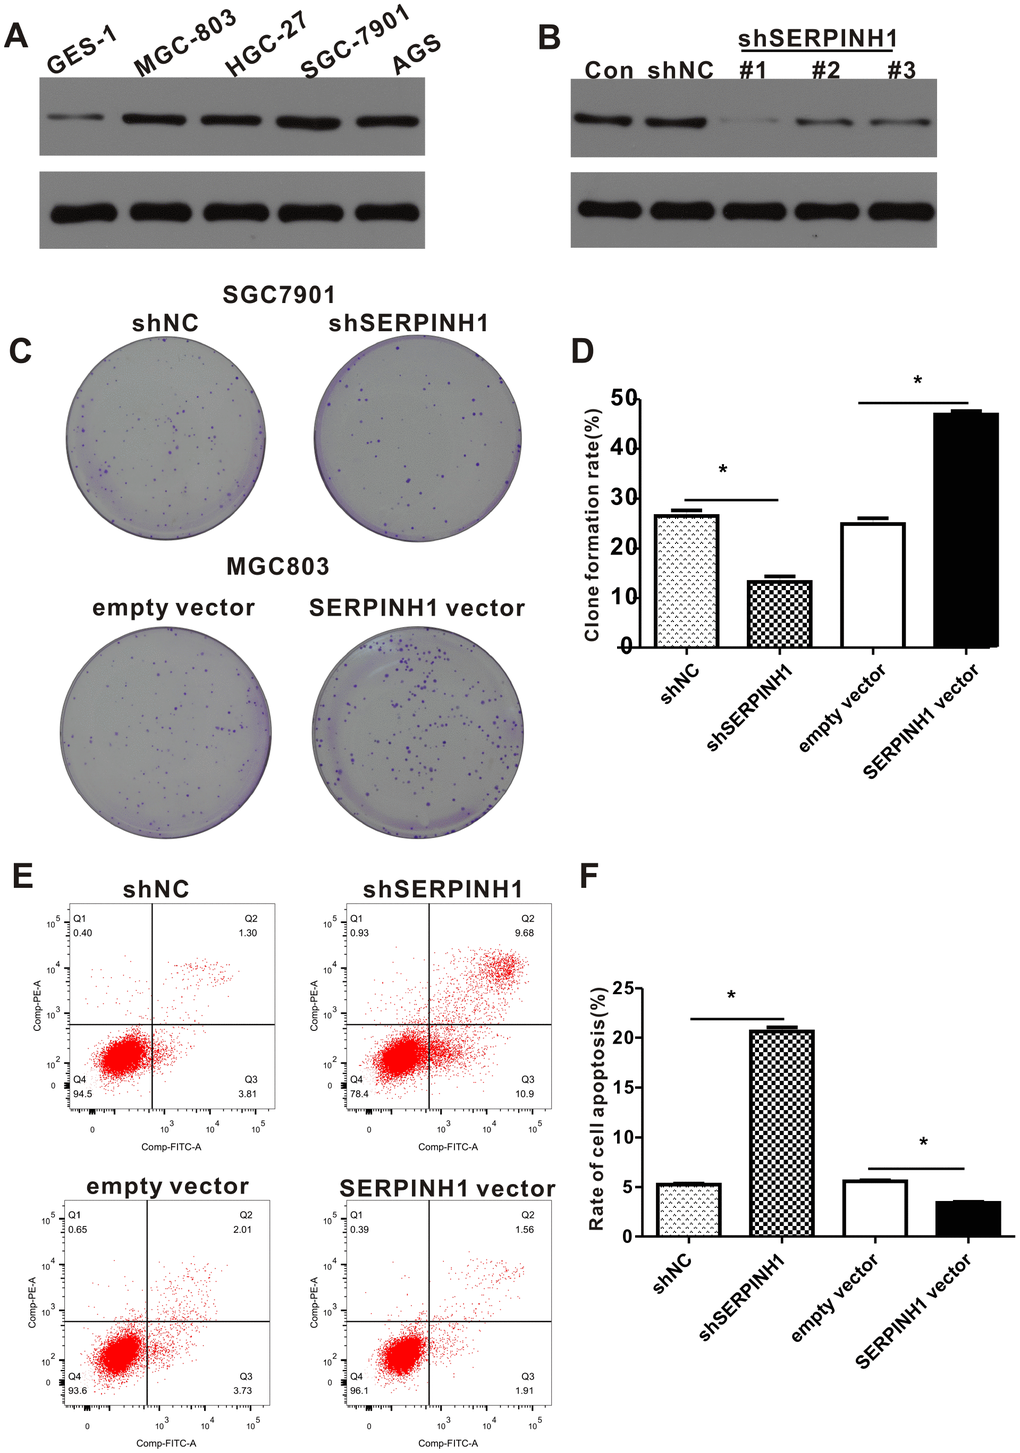 SERPINH1 expression regulates the proliferation and survival of GC cell lines. (A) Western blot analysis shows that SERPINH1 protein levels are higher in the four GC cell lines, HGC-27, AGS, MGC-803, SGC-7901, compared to the normal gastric mucosal cell line, GES-1. (B) Western blot analysis shows that SERPINH1 protein levels are significantly reduced in shSERPINH1 #1-transfected SGC-7901 cells compared with SGC-7901 cells transfected with shSERPINH1 #2, shSERPINH1 #2, and shNC. (C) Representative images of colonies in shSERPINH1#1-transfected SGC-7901 cells, SERPINH1-overexpression vector transfected MGC-803 cells, and their corresponding controls. (D) Histogram plots show the number of colonies in shSERPINH1#1-transfected SGC-7901 cells, SERPINH1-overexpression vector-transfected MGC-803 cells, and their corresponding controls. (E) Flow cytometry analysis shows that apoptotic rate is significantly higher in the shSERPINH1#1-transfected SGC-7901 cells and significantly lower in the SERPINH1-overexpression vector-transfected MGC-803 cells compared to their corresponding controls. (F) Histogram plot shows the percentage of apoptotic cells in shNC-, and shSERPINH1#1-transfected SGC-7901 cell cultures, as well as, empty vector and SERPINH1-overexpression vector-transfected MGC-803 cells.